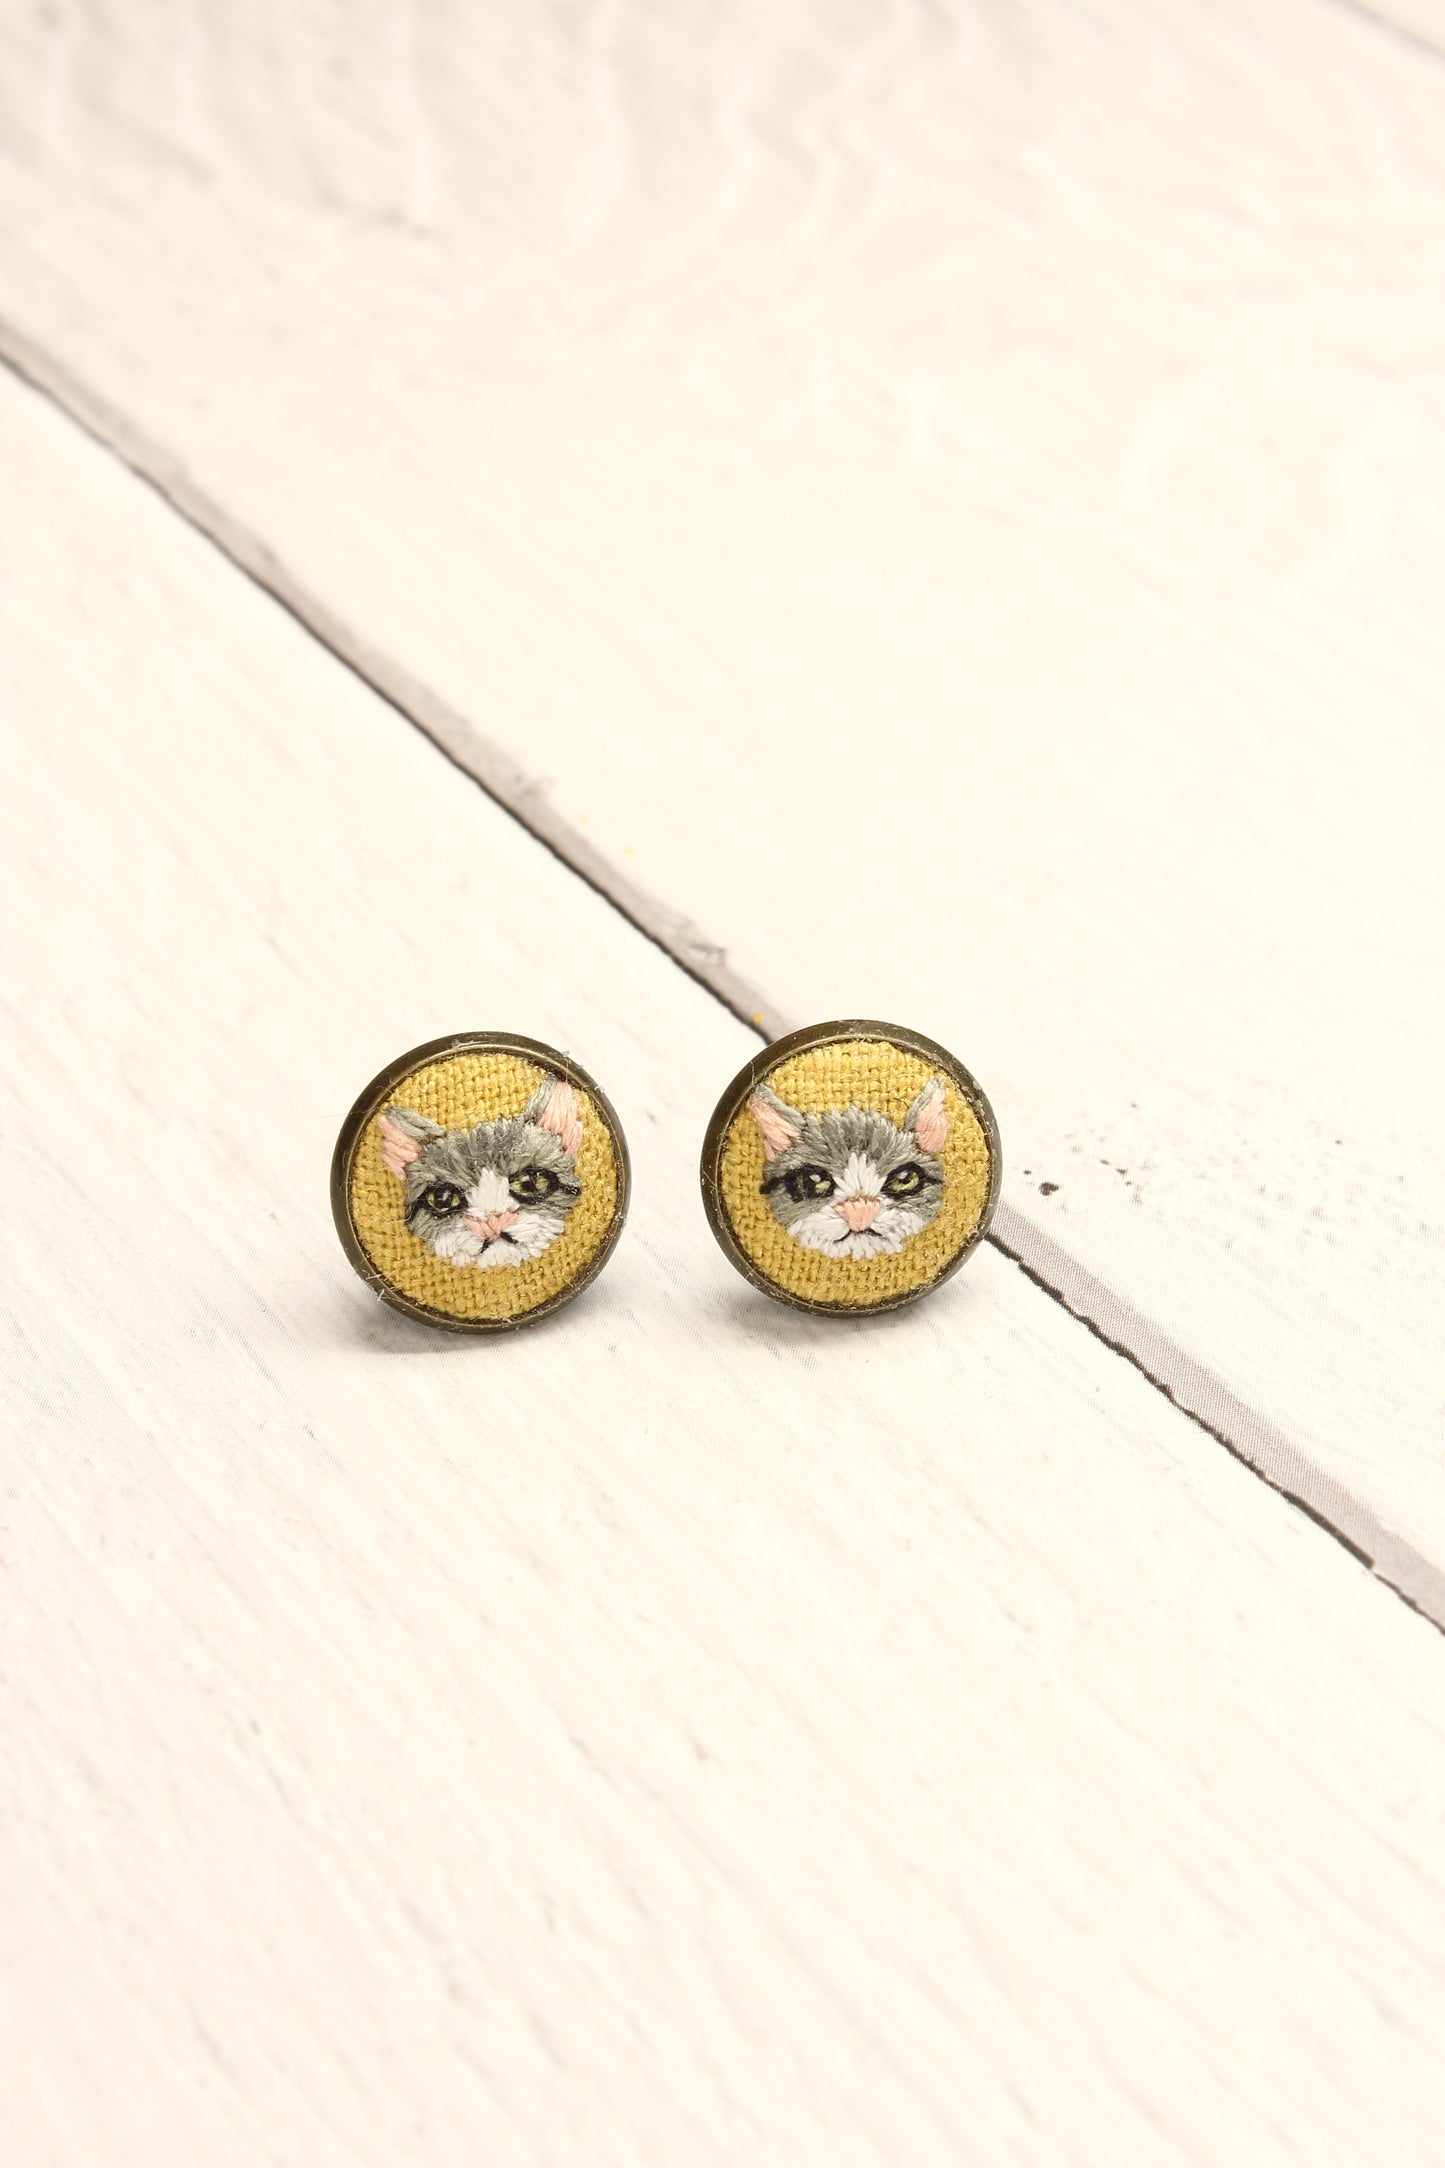 Embroidery Gray & White Cat Studs Earrings